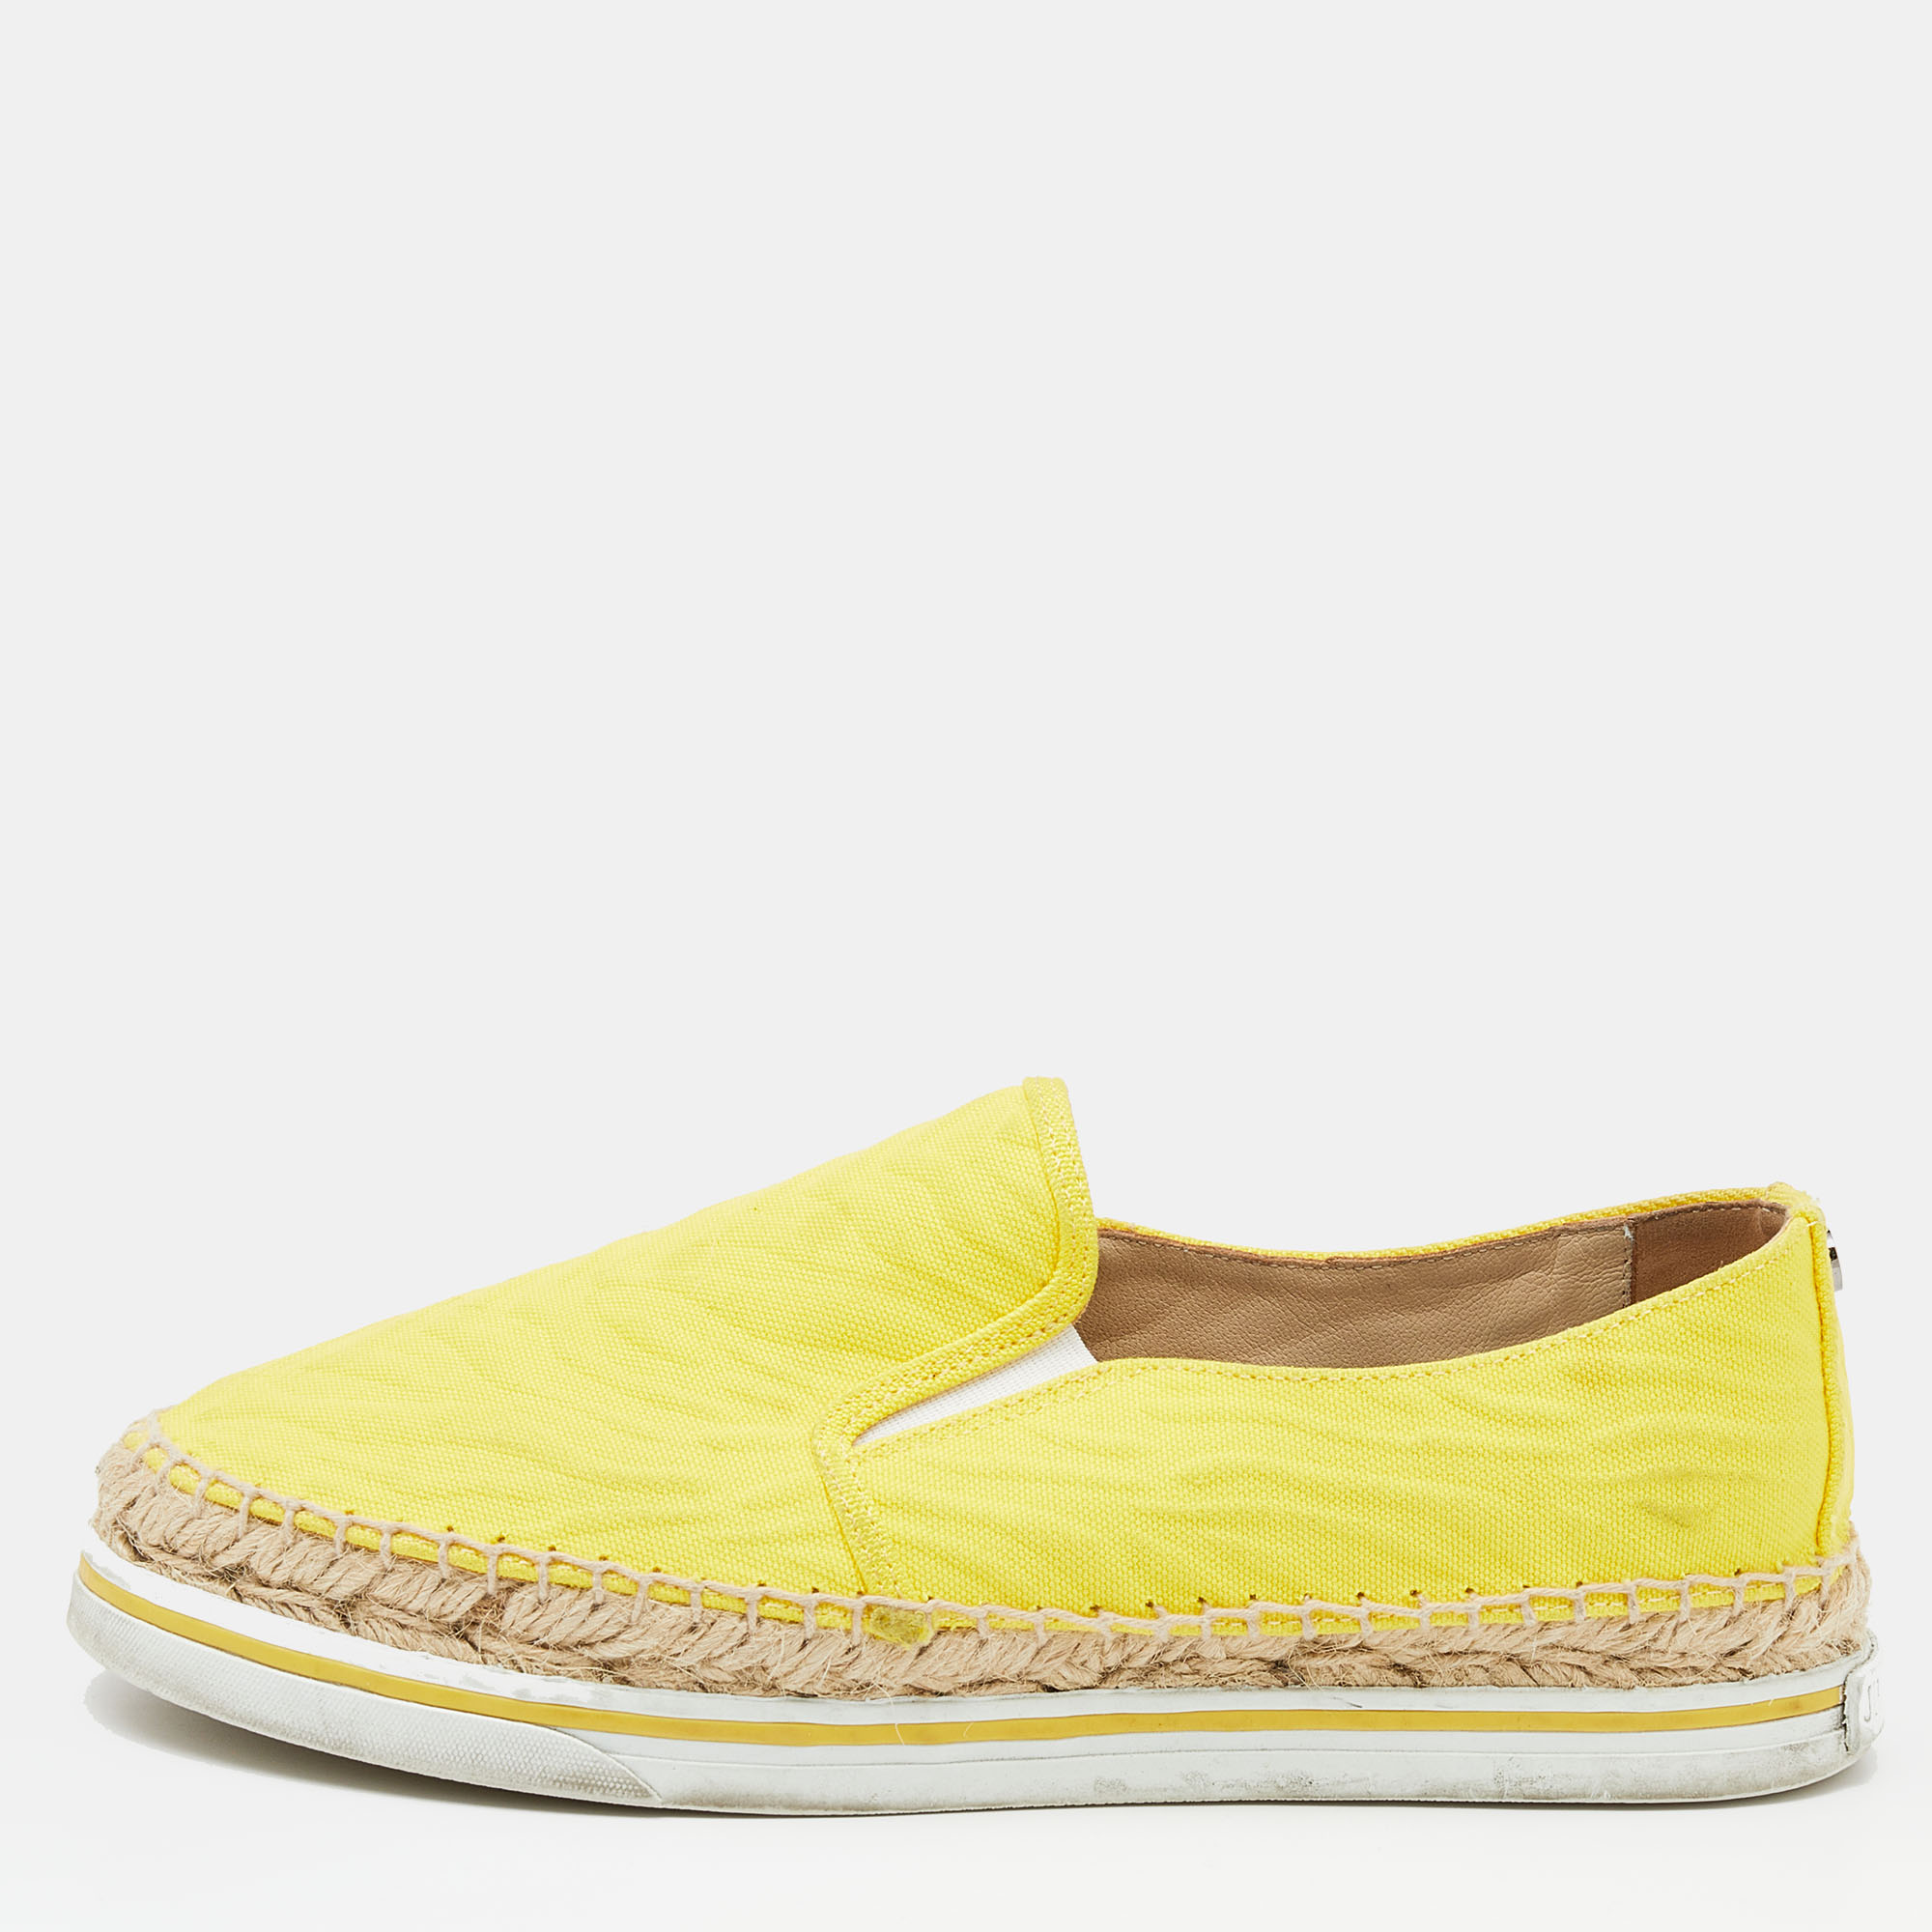 Pre-owned Jimmy Choo Yellow Canvas Dawn Slip On Espadrille Sneakers Size 35.5